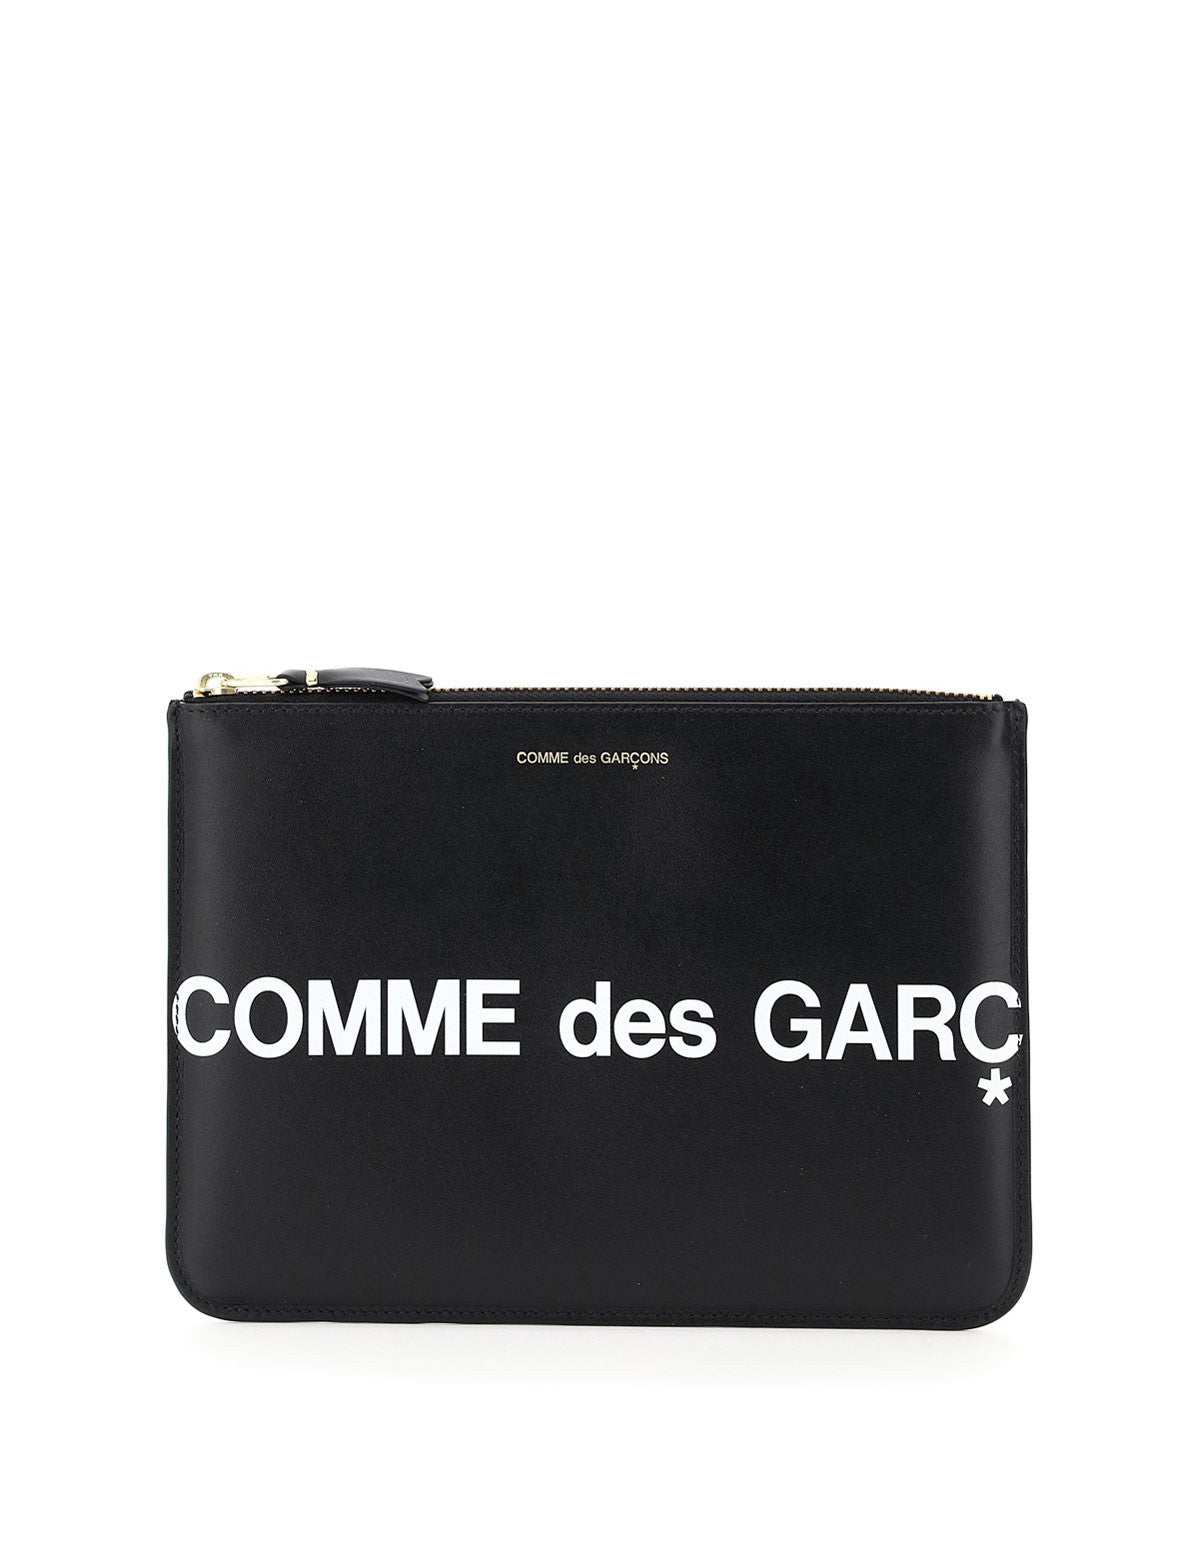 comme-des-garcons-wallet-leather-pouch-with-logo.jpg